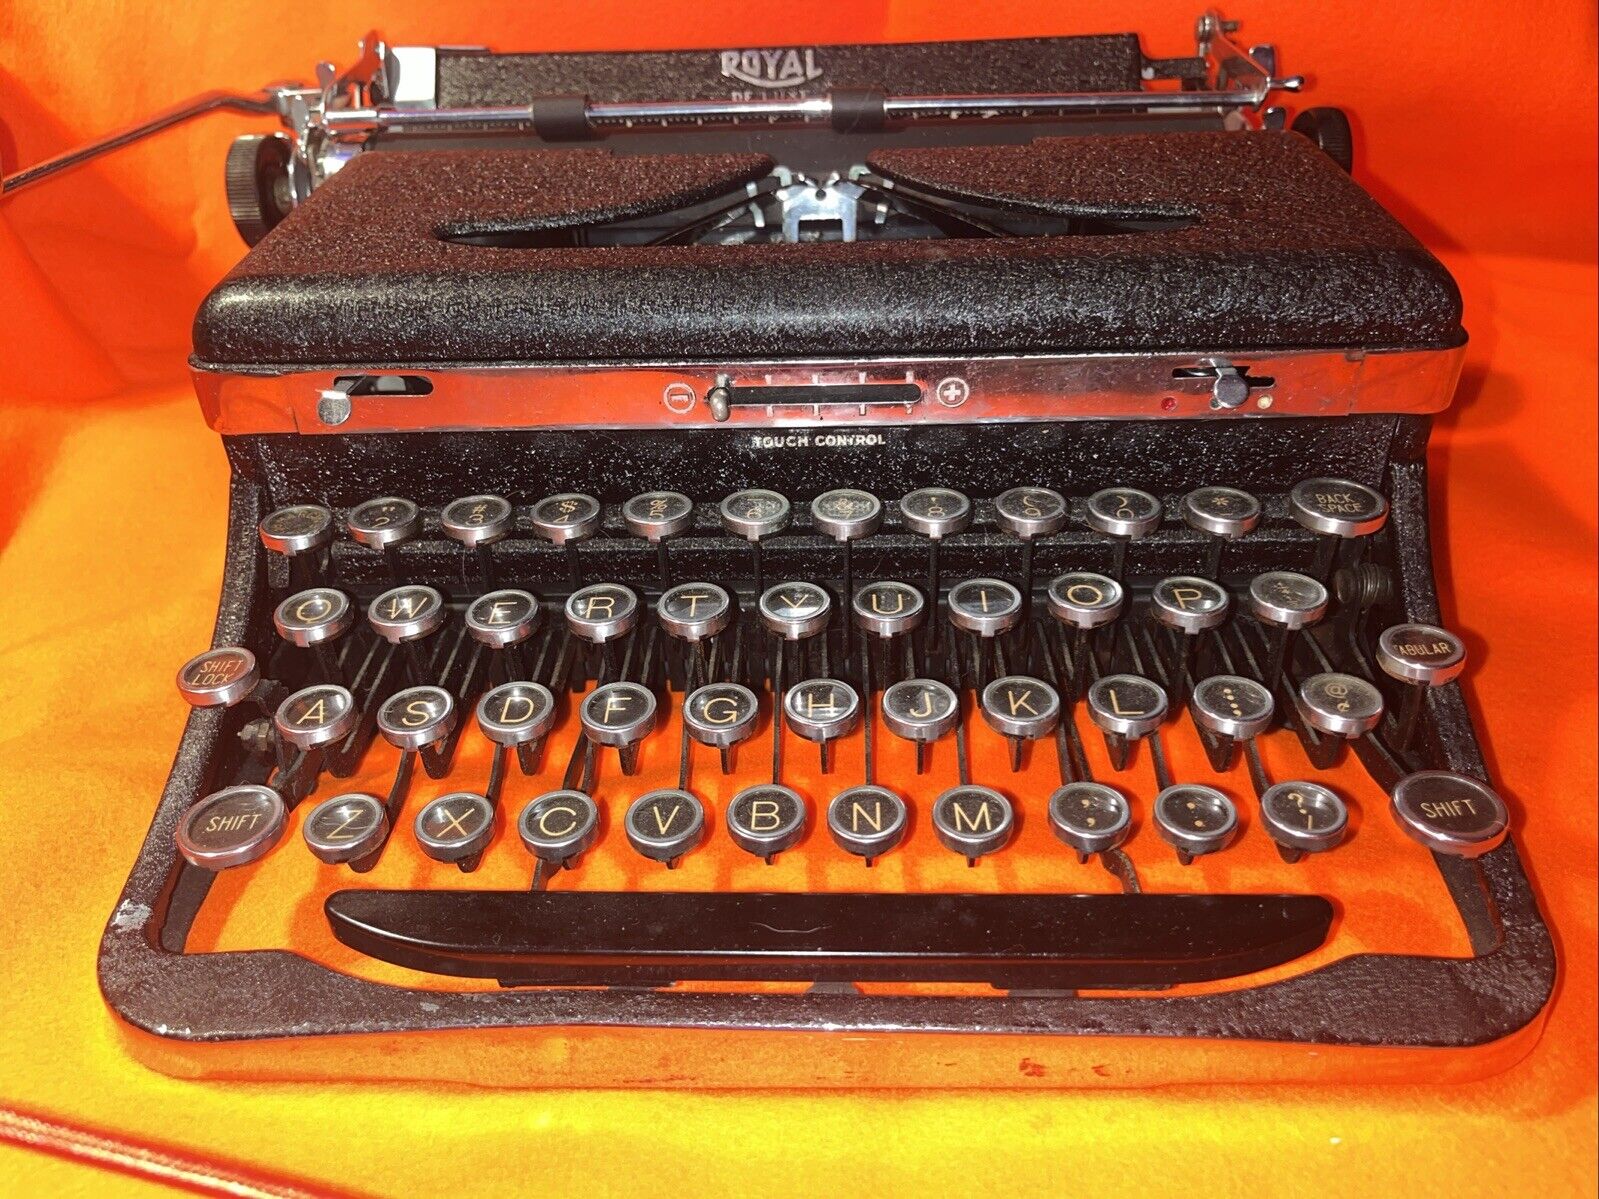 Stunning Vintage Royal DeLuxe Portable Typewriter Black 30s 40s decor Works read